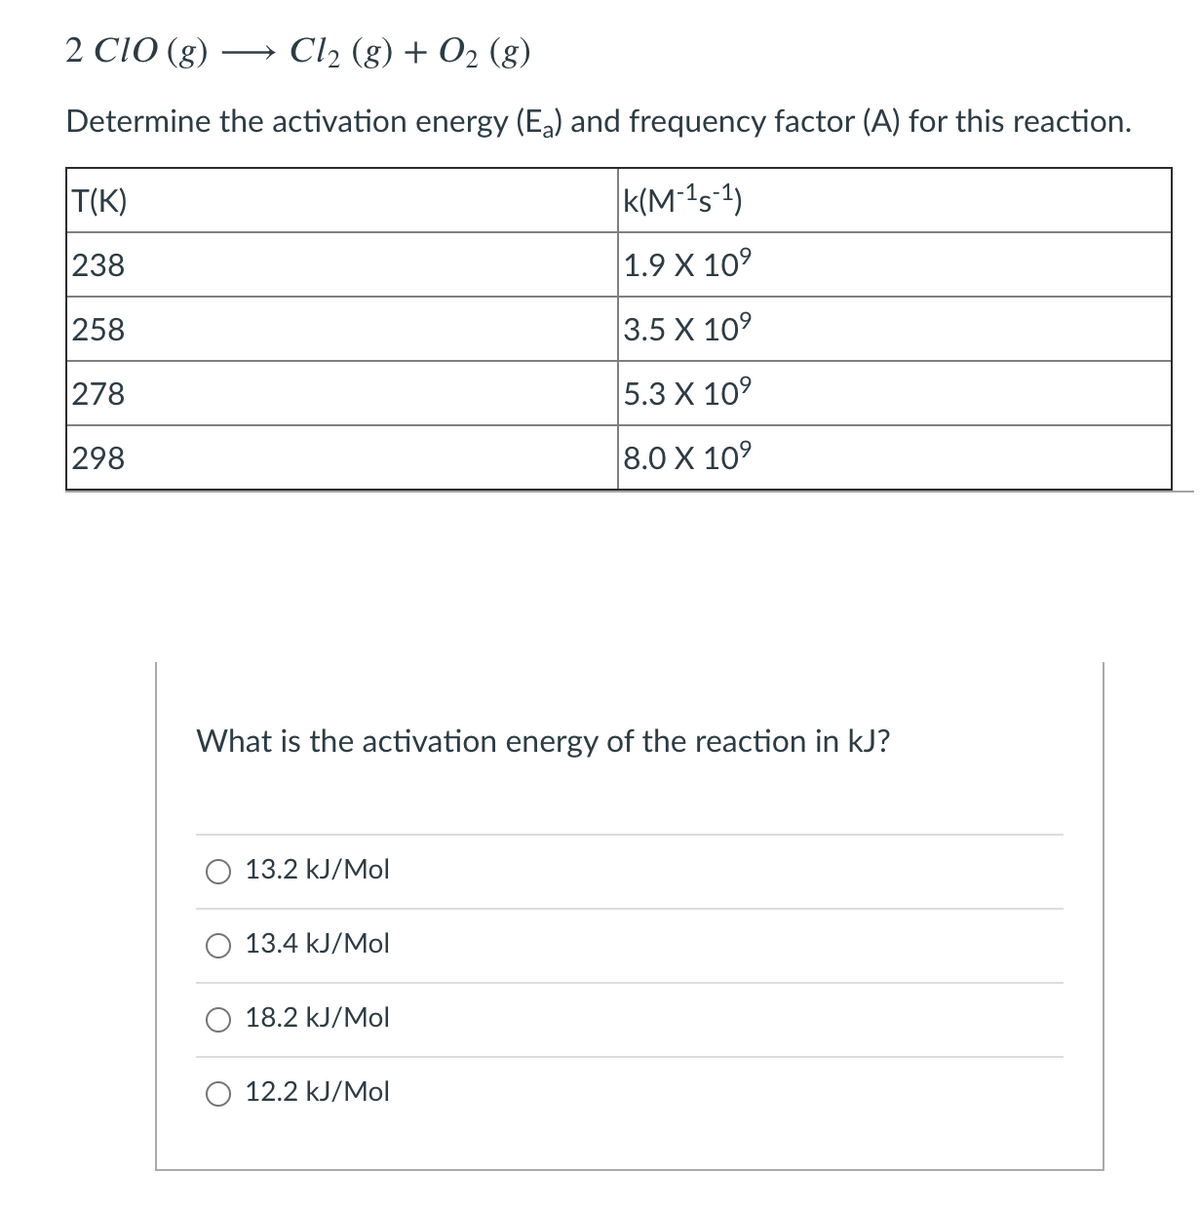 2 CIO (g)
Cl2 (g) + O2 (g)
Determine the activation energy (Ea) and frequency factor (A) for this reaction.
|T(K)
k(M1s1)
238
1.9 X 10
258
3.5 X 109
278
5.3 X 109
298
8.0 X 10°
What is the activation energy of the reaction in kJ?
13.2 kJ/Mol
13.4 kJ/Mol
18.2 kJ/Mol
12.2 kJ/Mol
